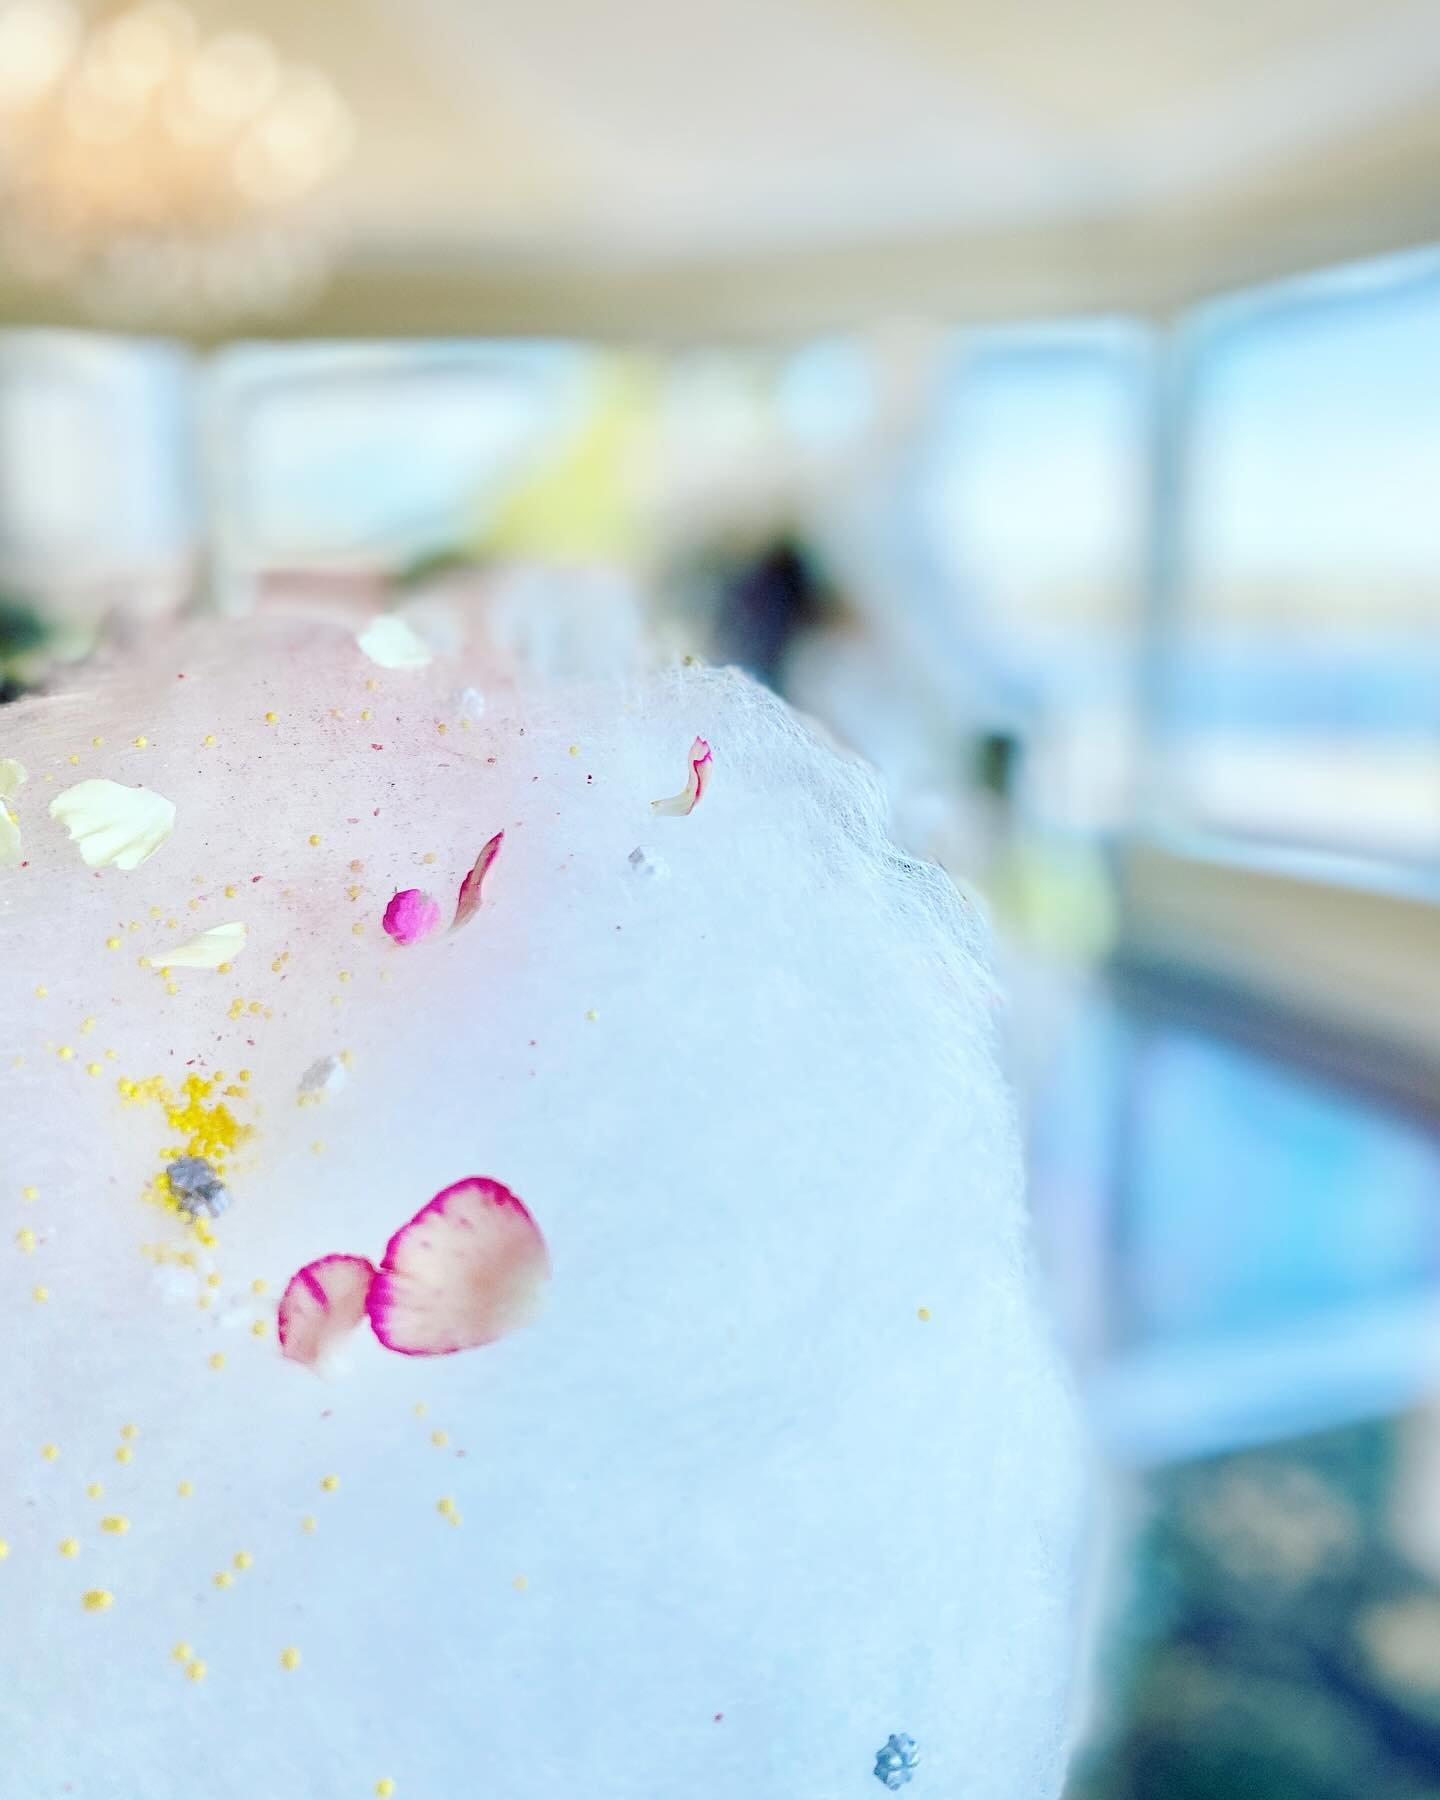 Bridal Shower Bliss: Amalfi inspired🍋Limoncello flavored🍋bedecked with Love💛
&amp; flower petals
&amp; lemon confetti
&amp; strawberry pixie dust
💛💛💛💛💛💛💛💛💛💛💛💛💛💛💛

#fluffandfluff #artisanal #organic #natural #cottoncandy #candyfloss 